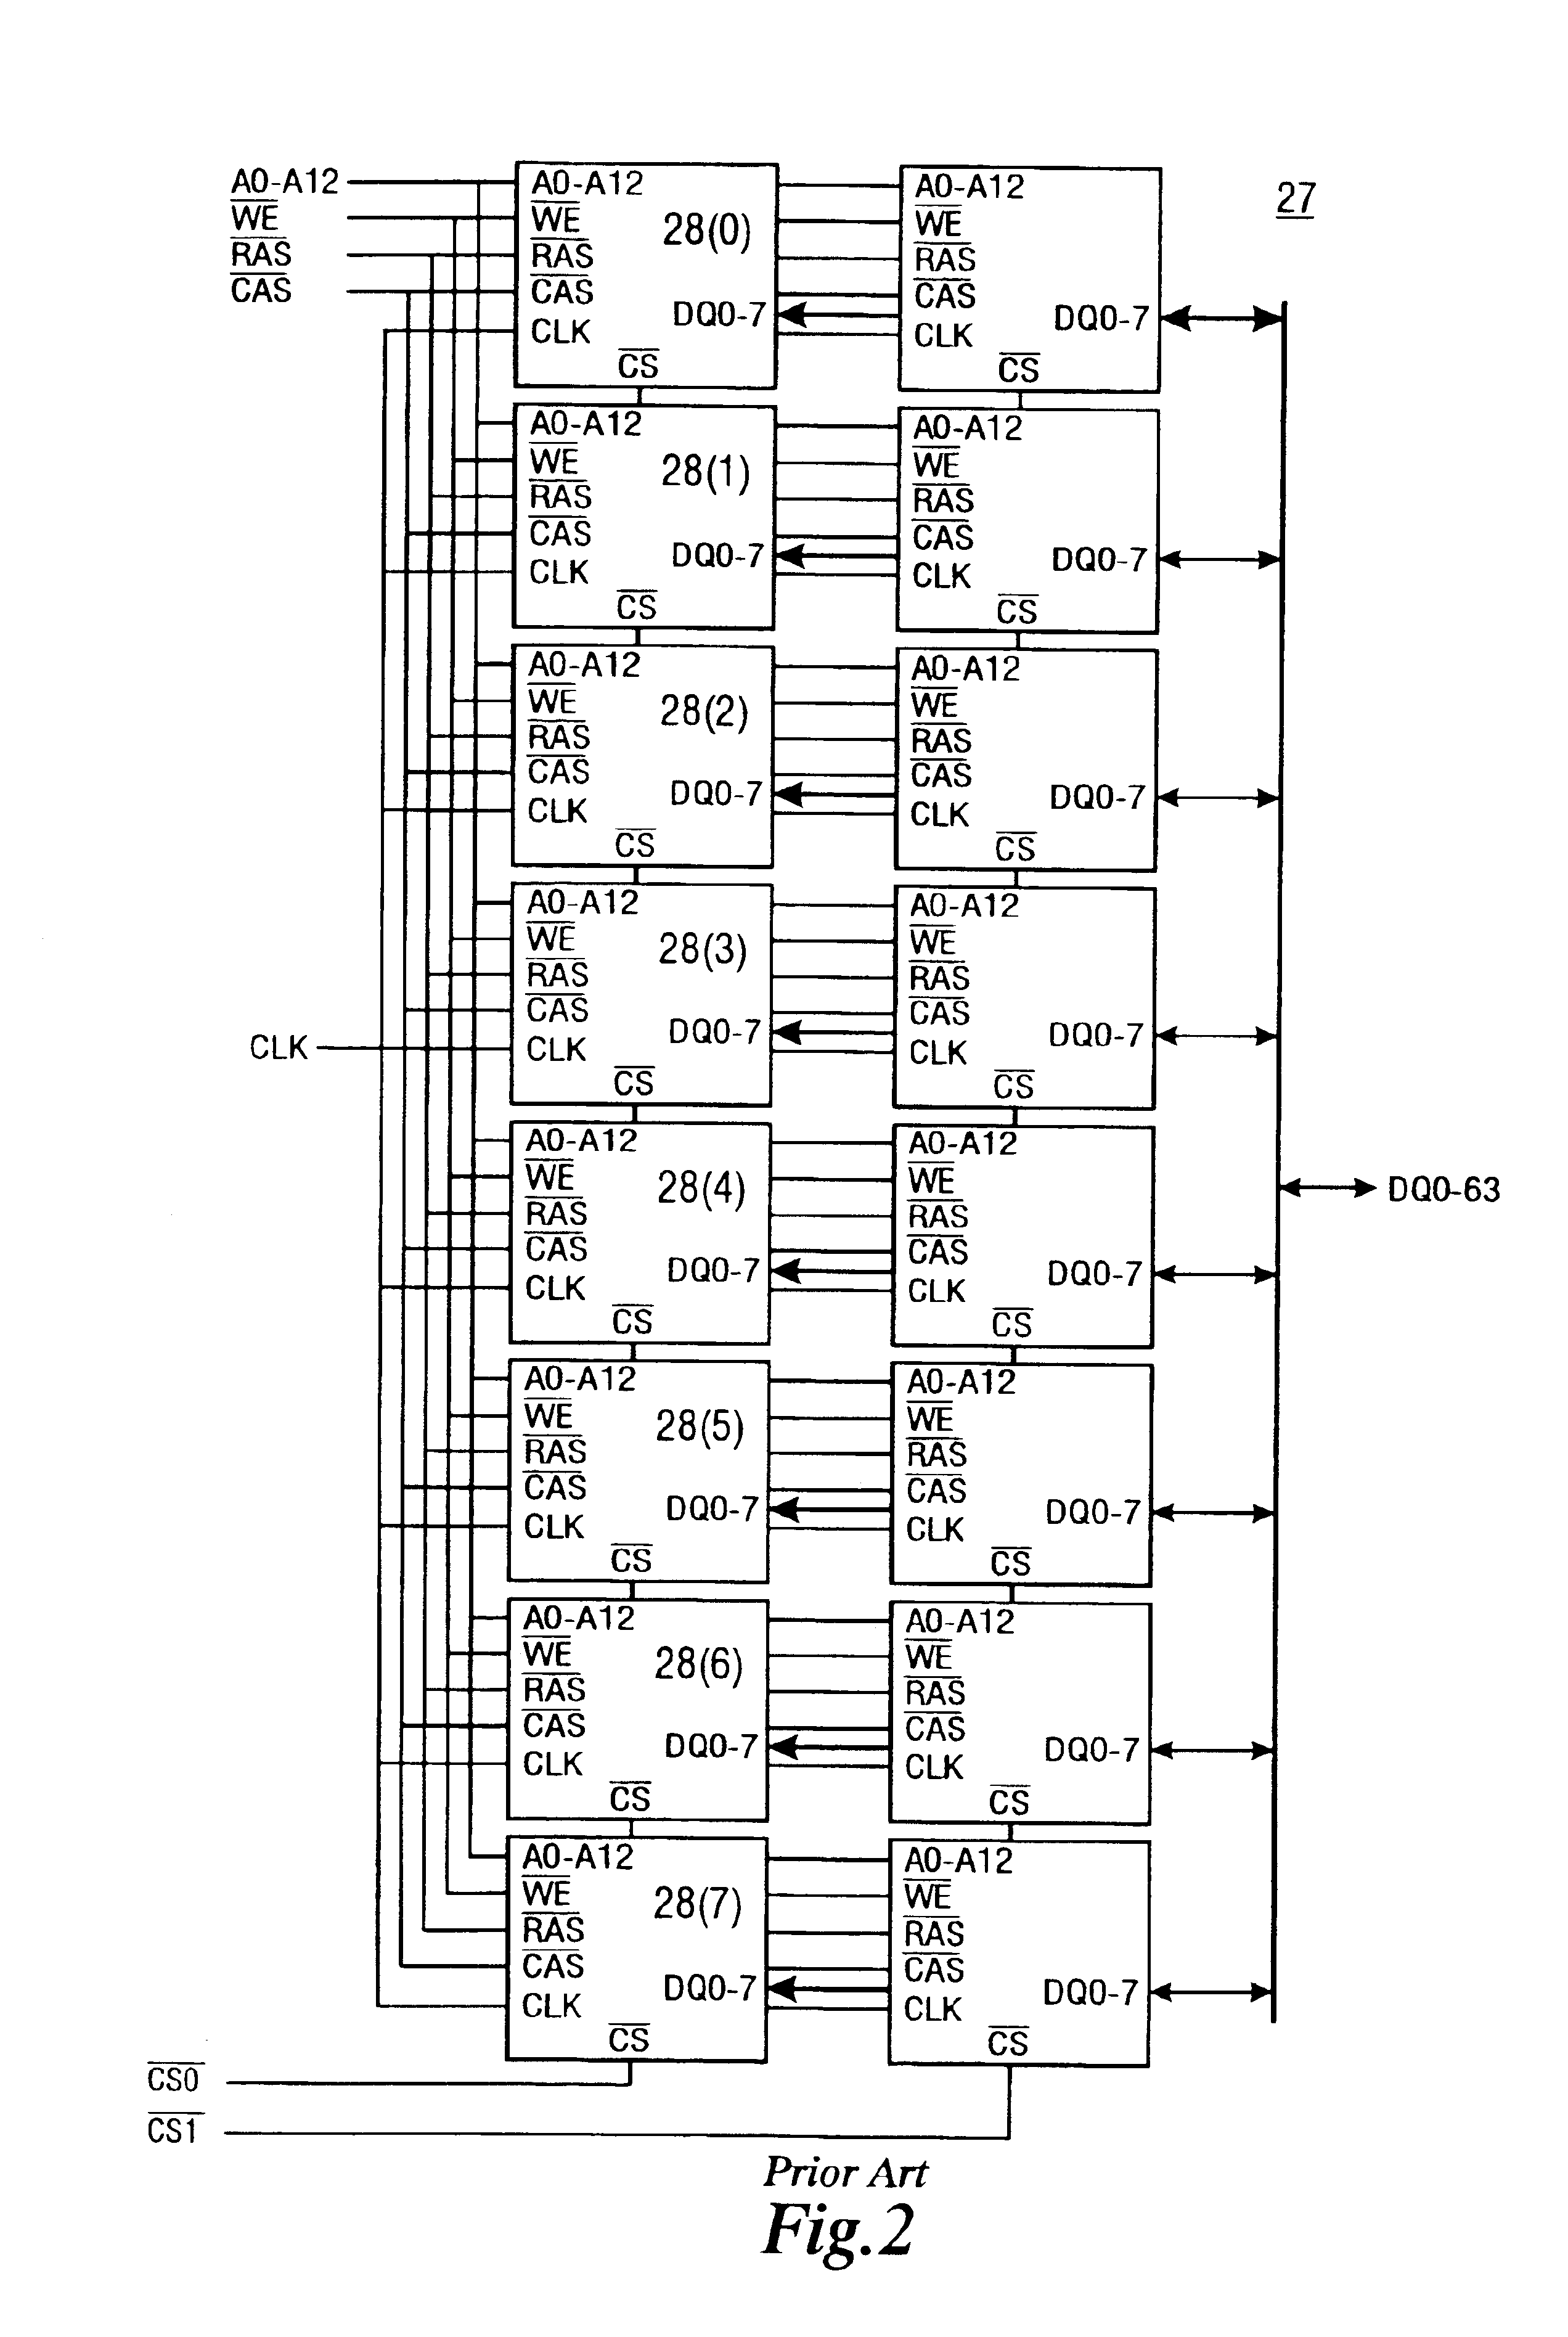 Memory device having different burst order addressing for read and write operations